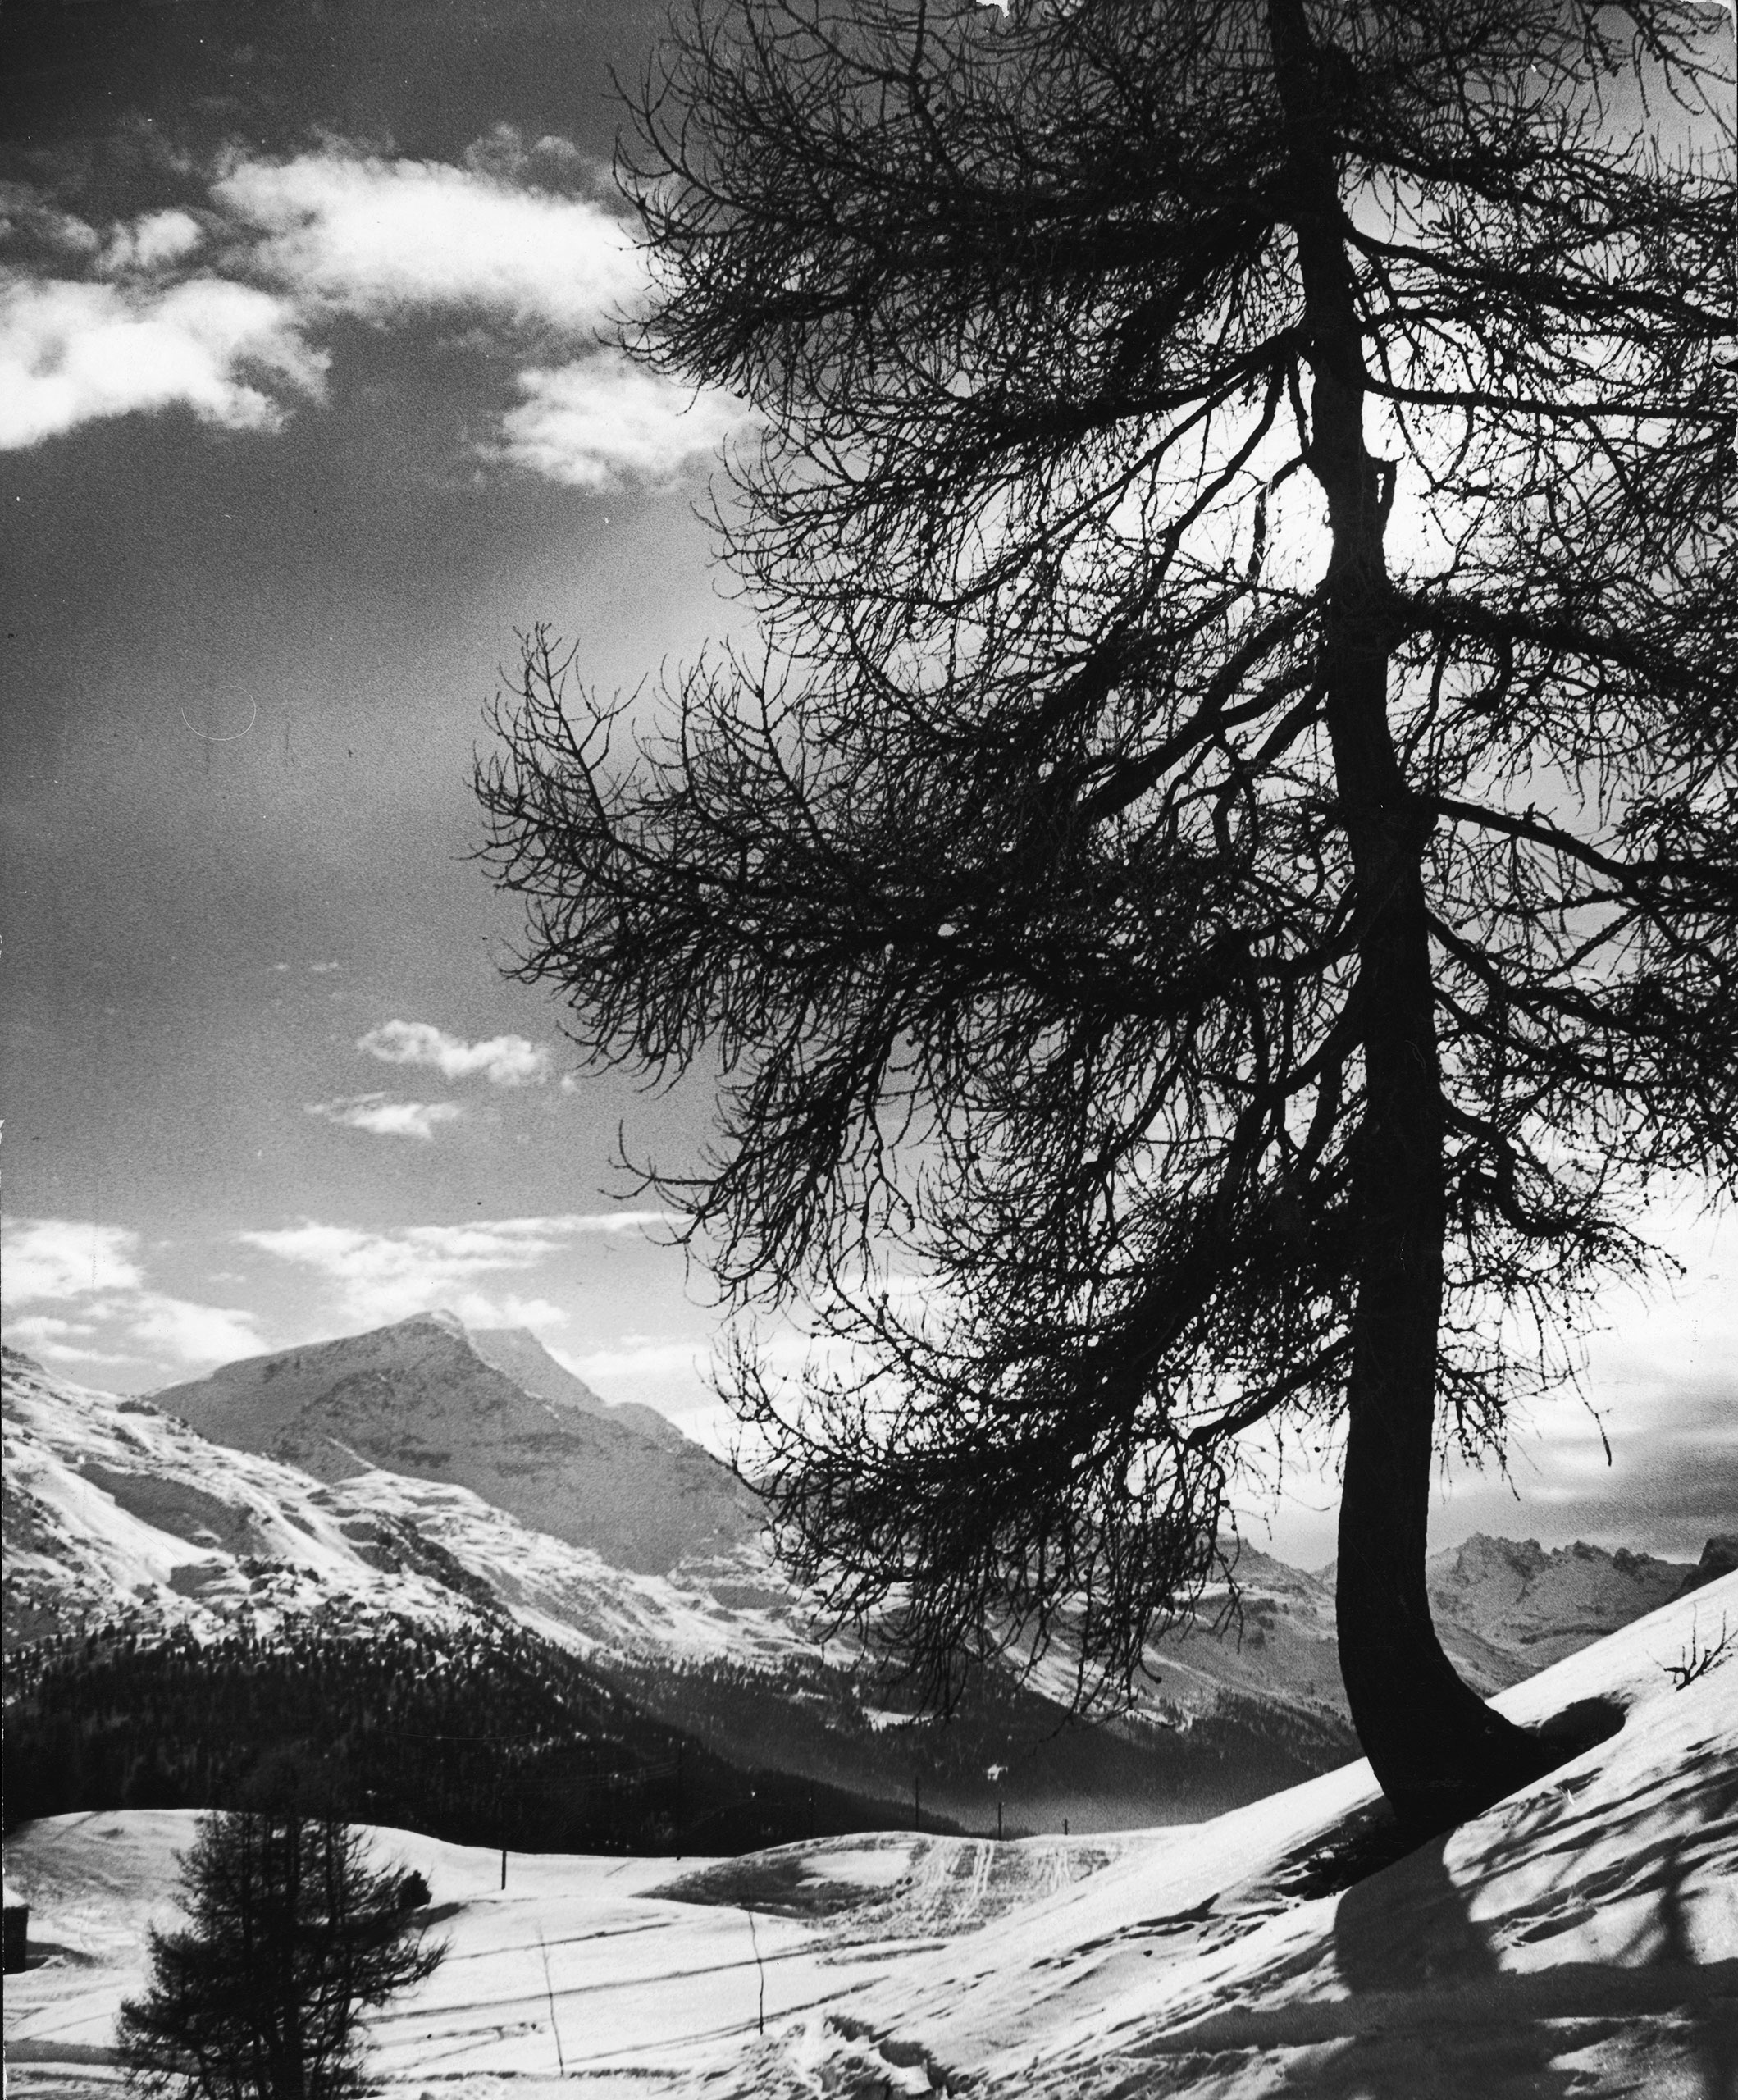 Tree on Alpine slopes, 1947. Peak in the background is Piz Corvatsch.